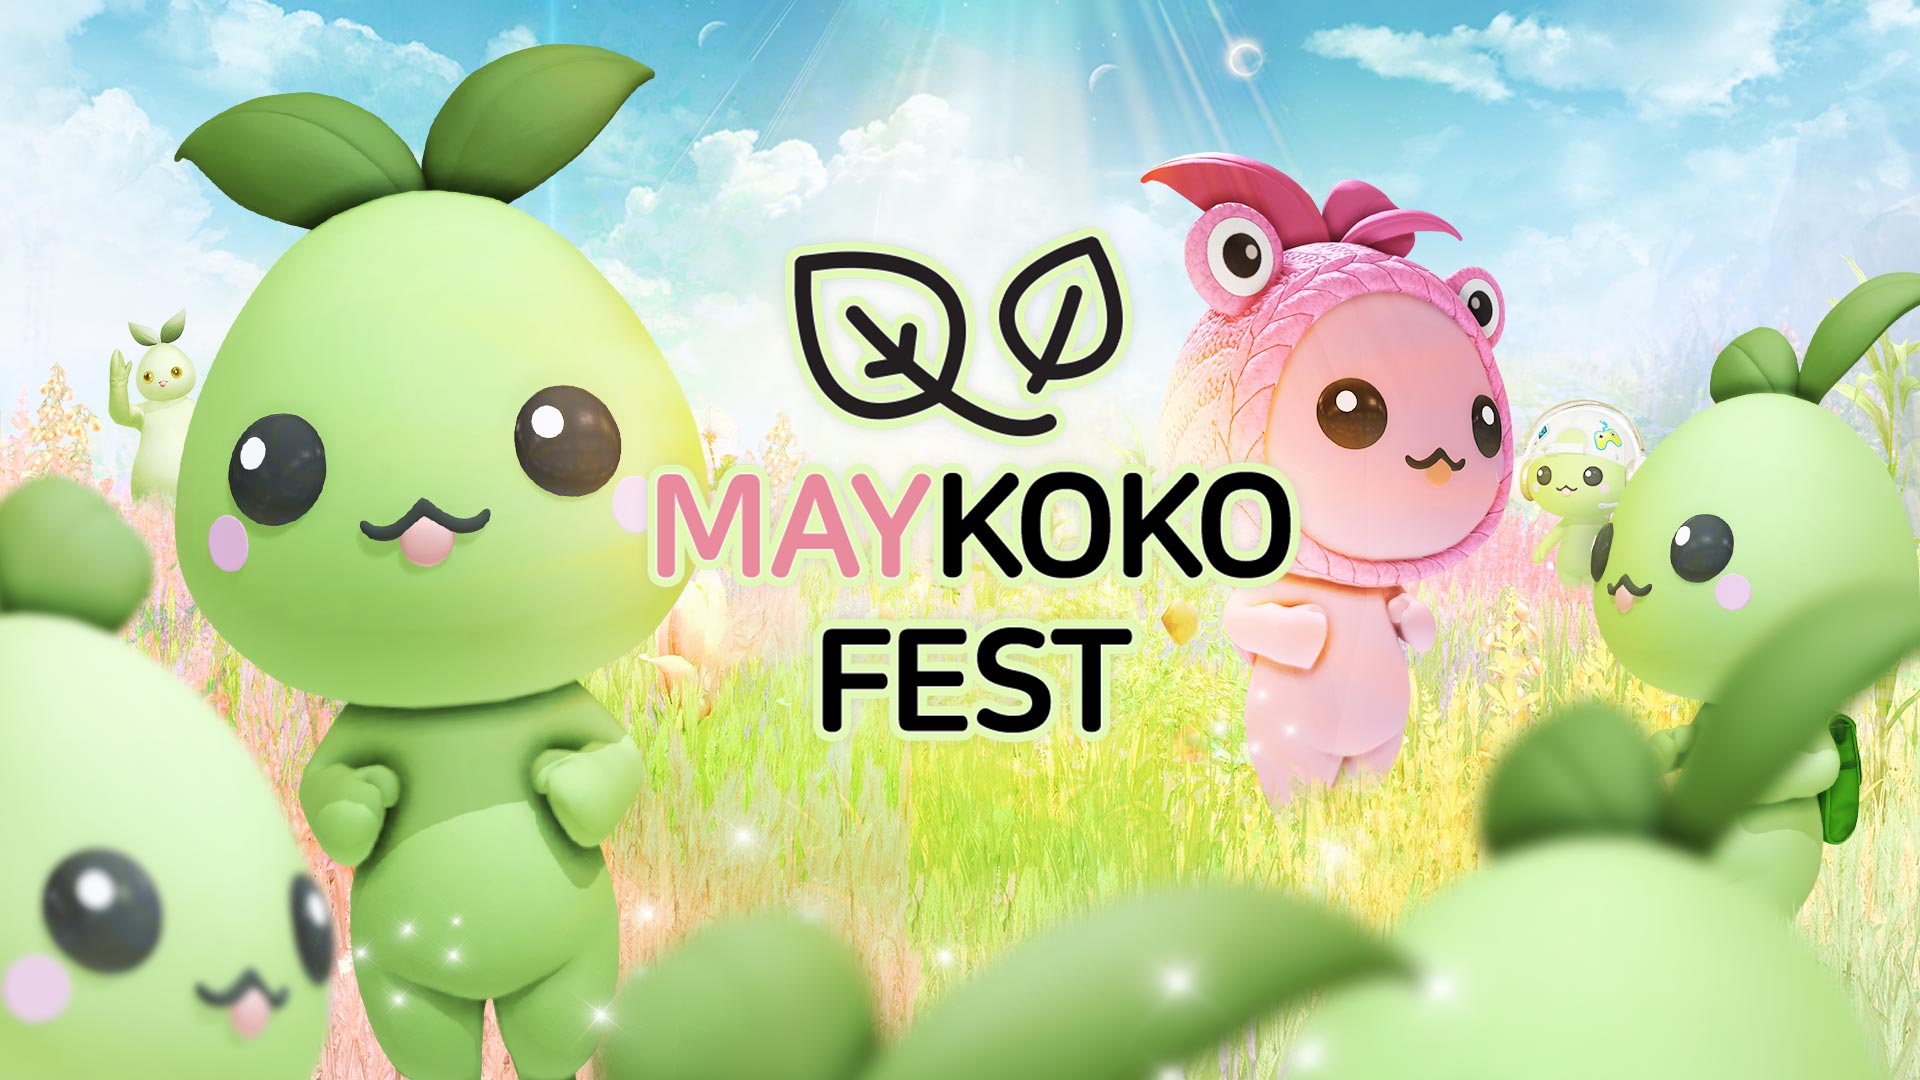 Lost Ark Announces Inaugural Maykoko Fest for the Month of May